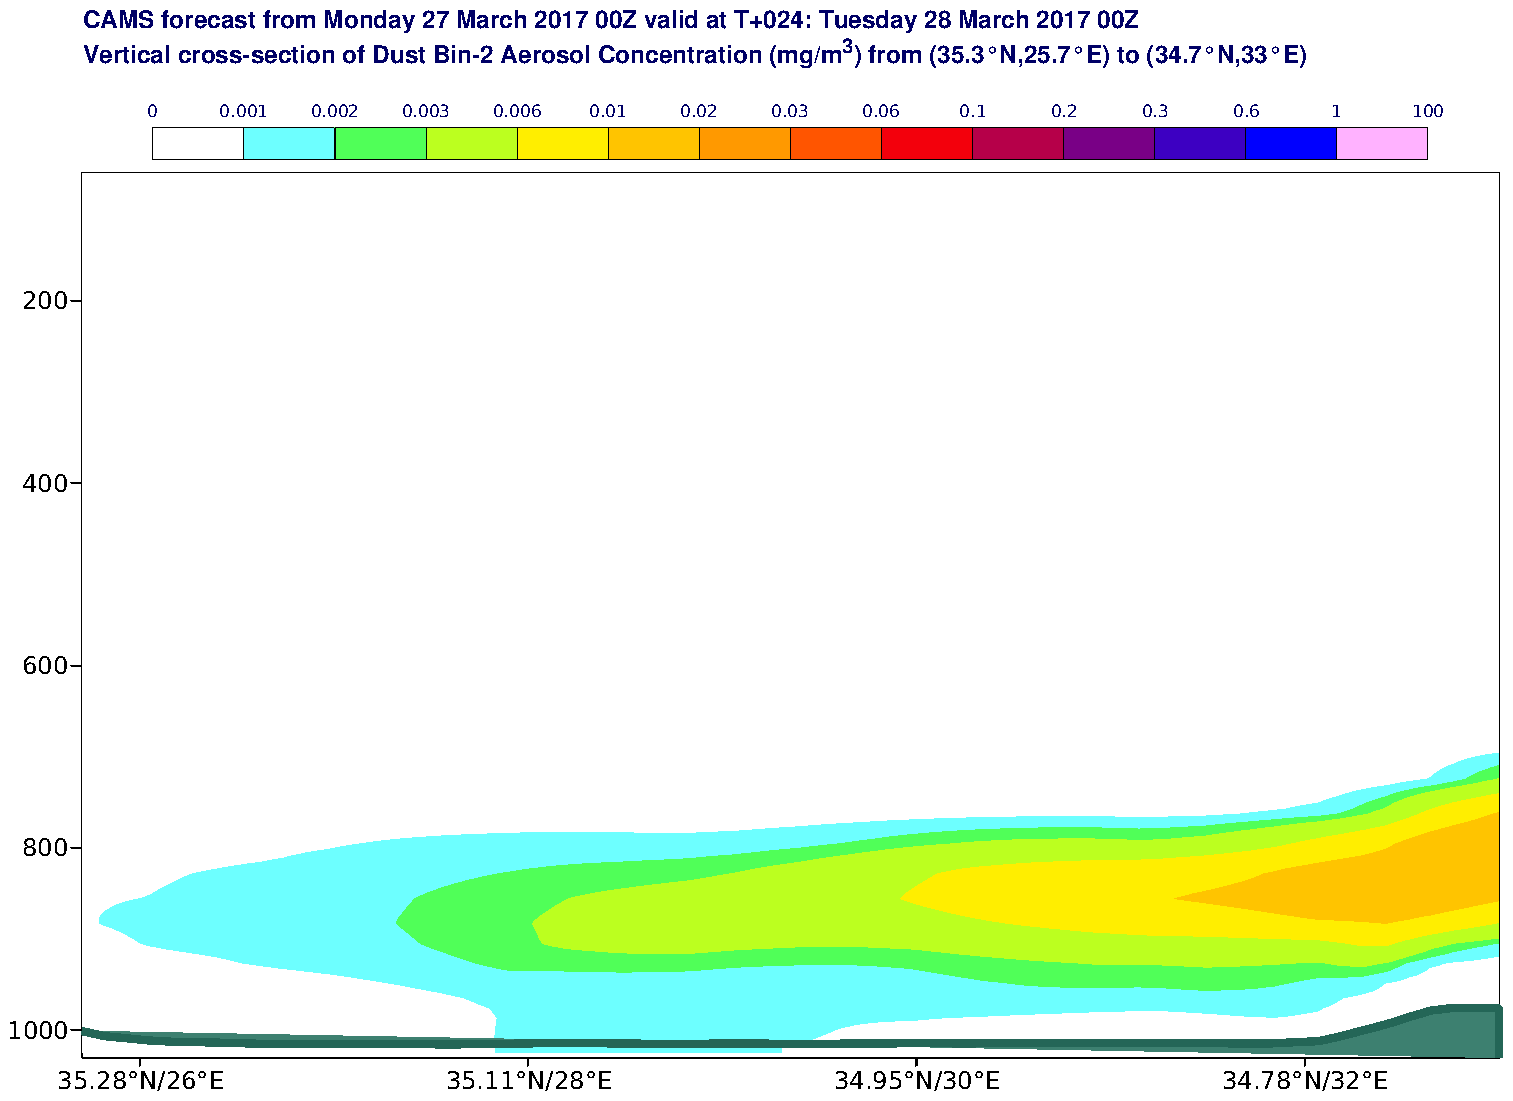 Vertical cross-section of Dust Bin-2 Aerosol Concentration (mg/m3) valid at T24 - 2017-03-28 00:00